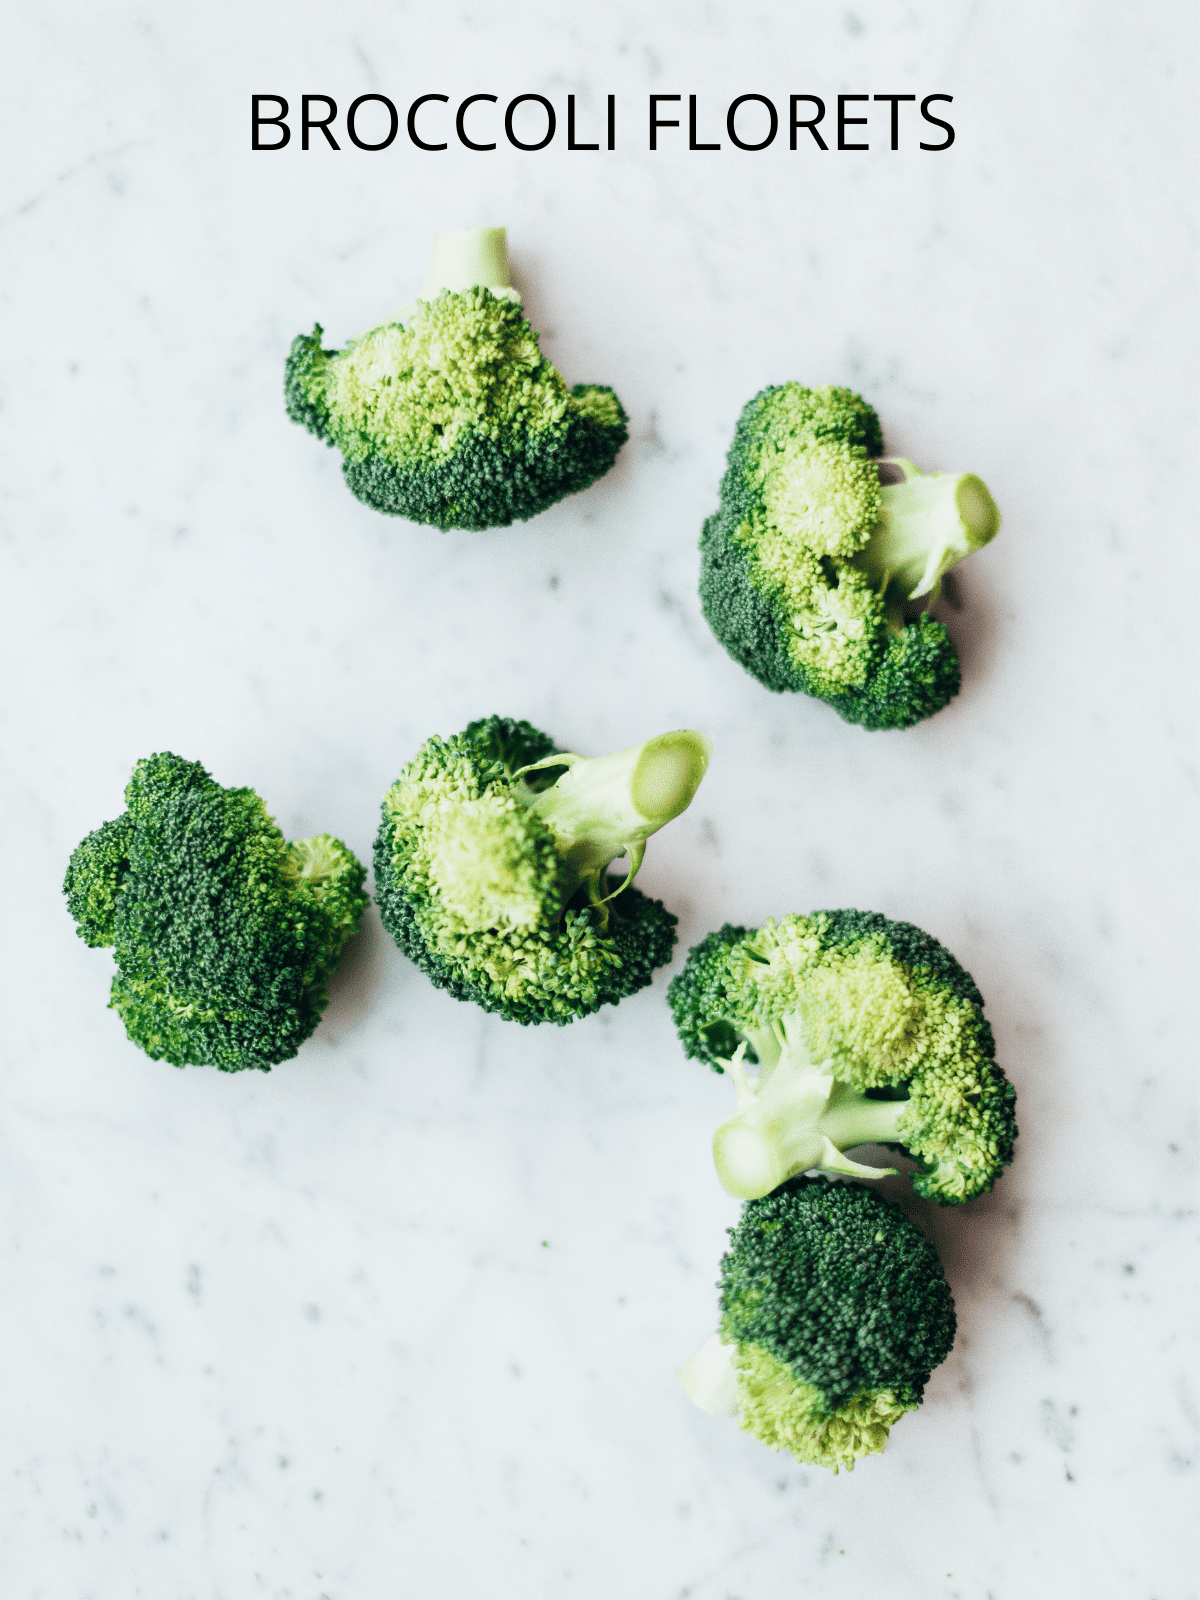 Several broccoli florets on a counter.